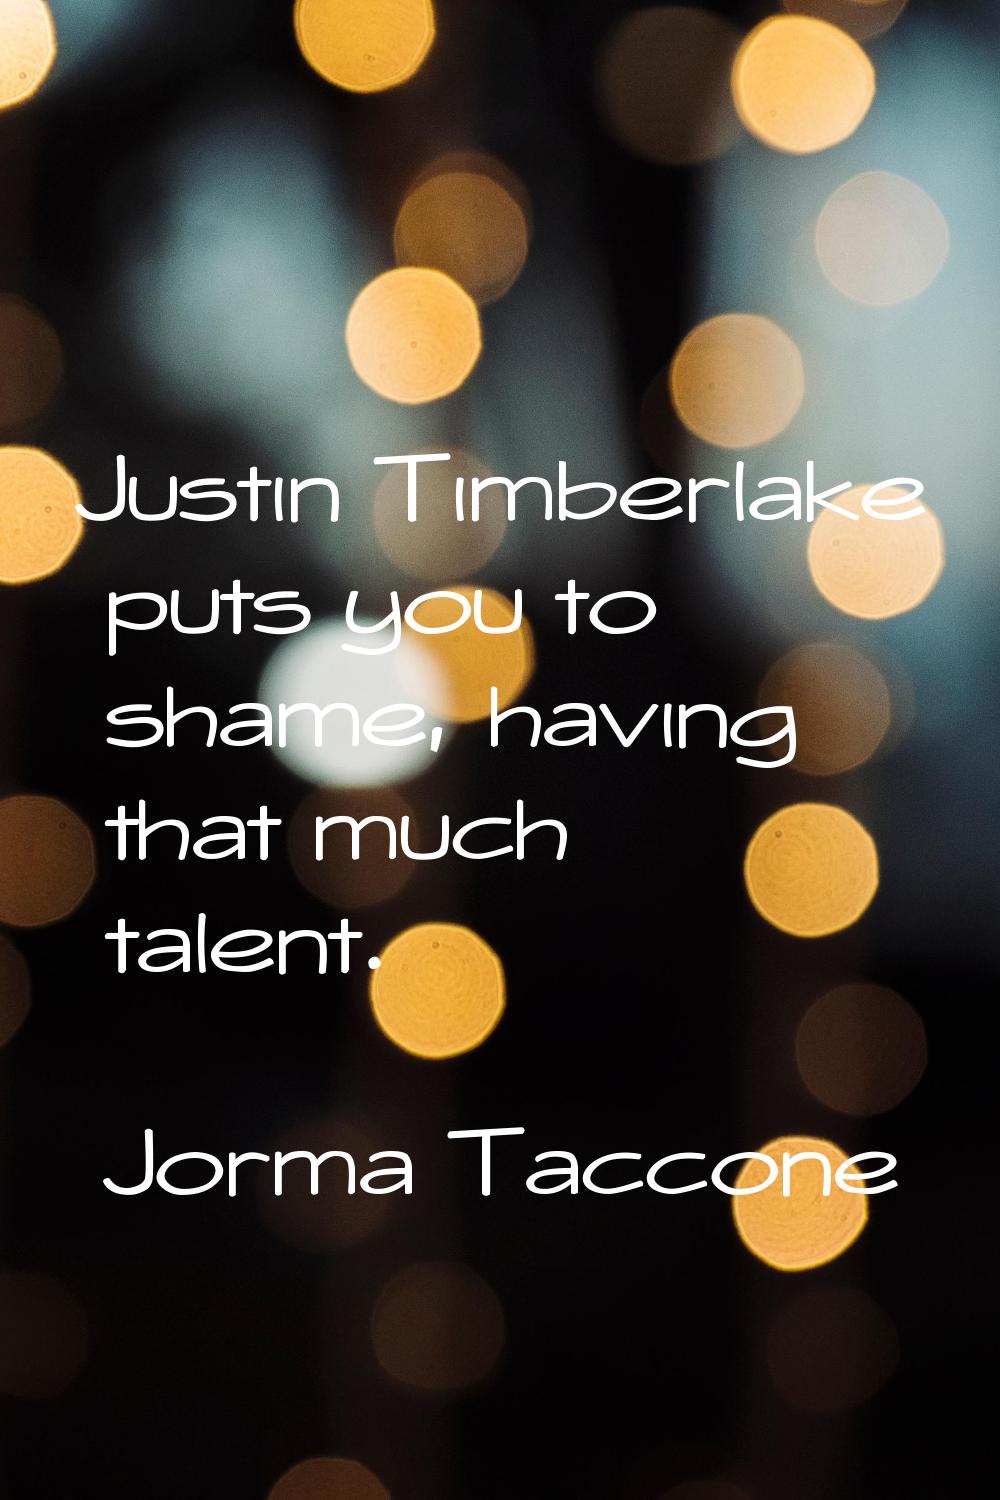 Justin Timberlake puts you to shame, having that much talent.